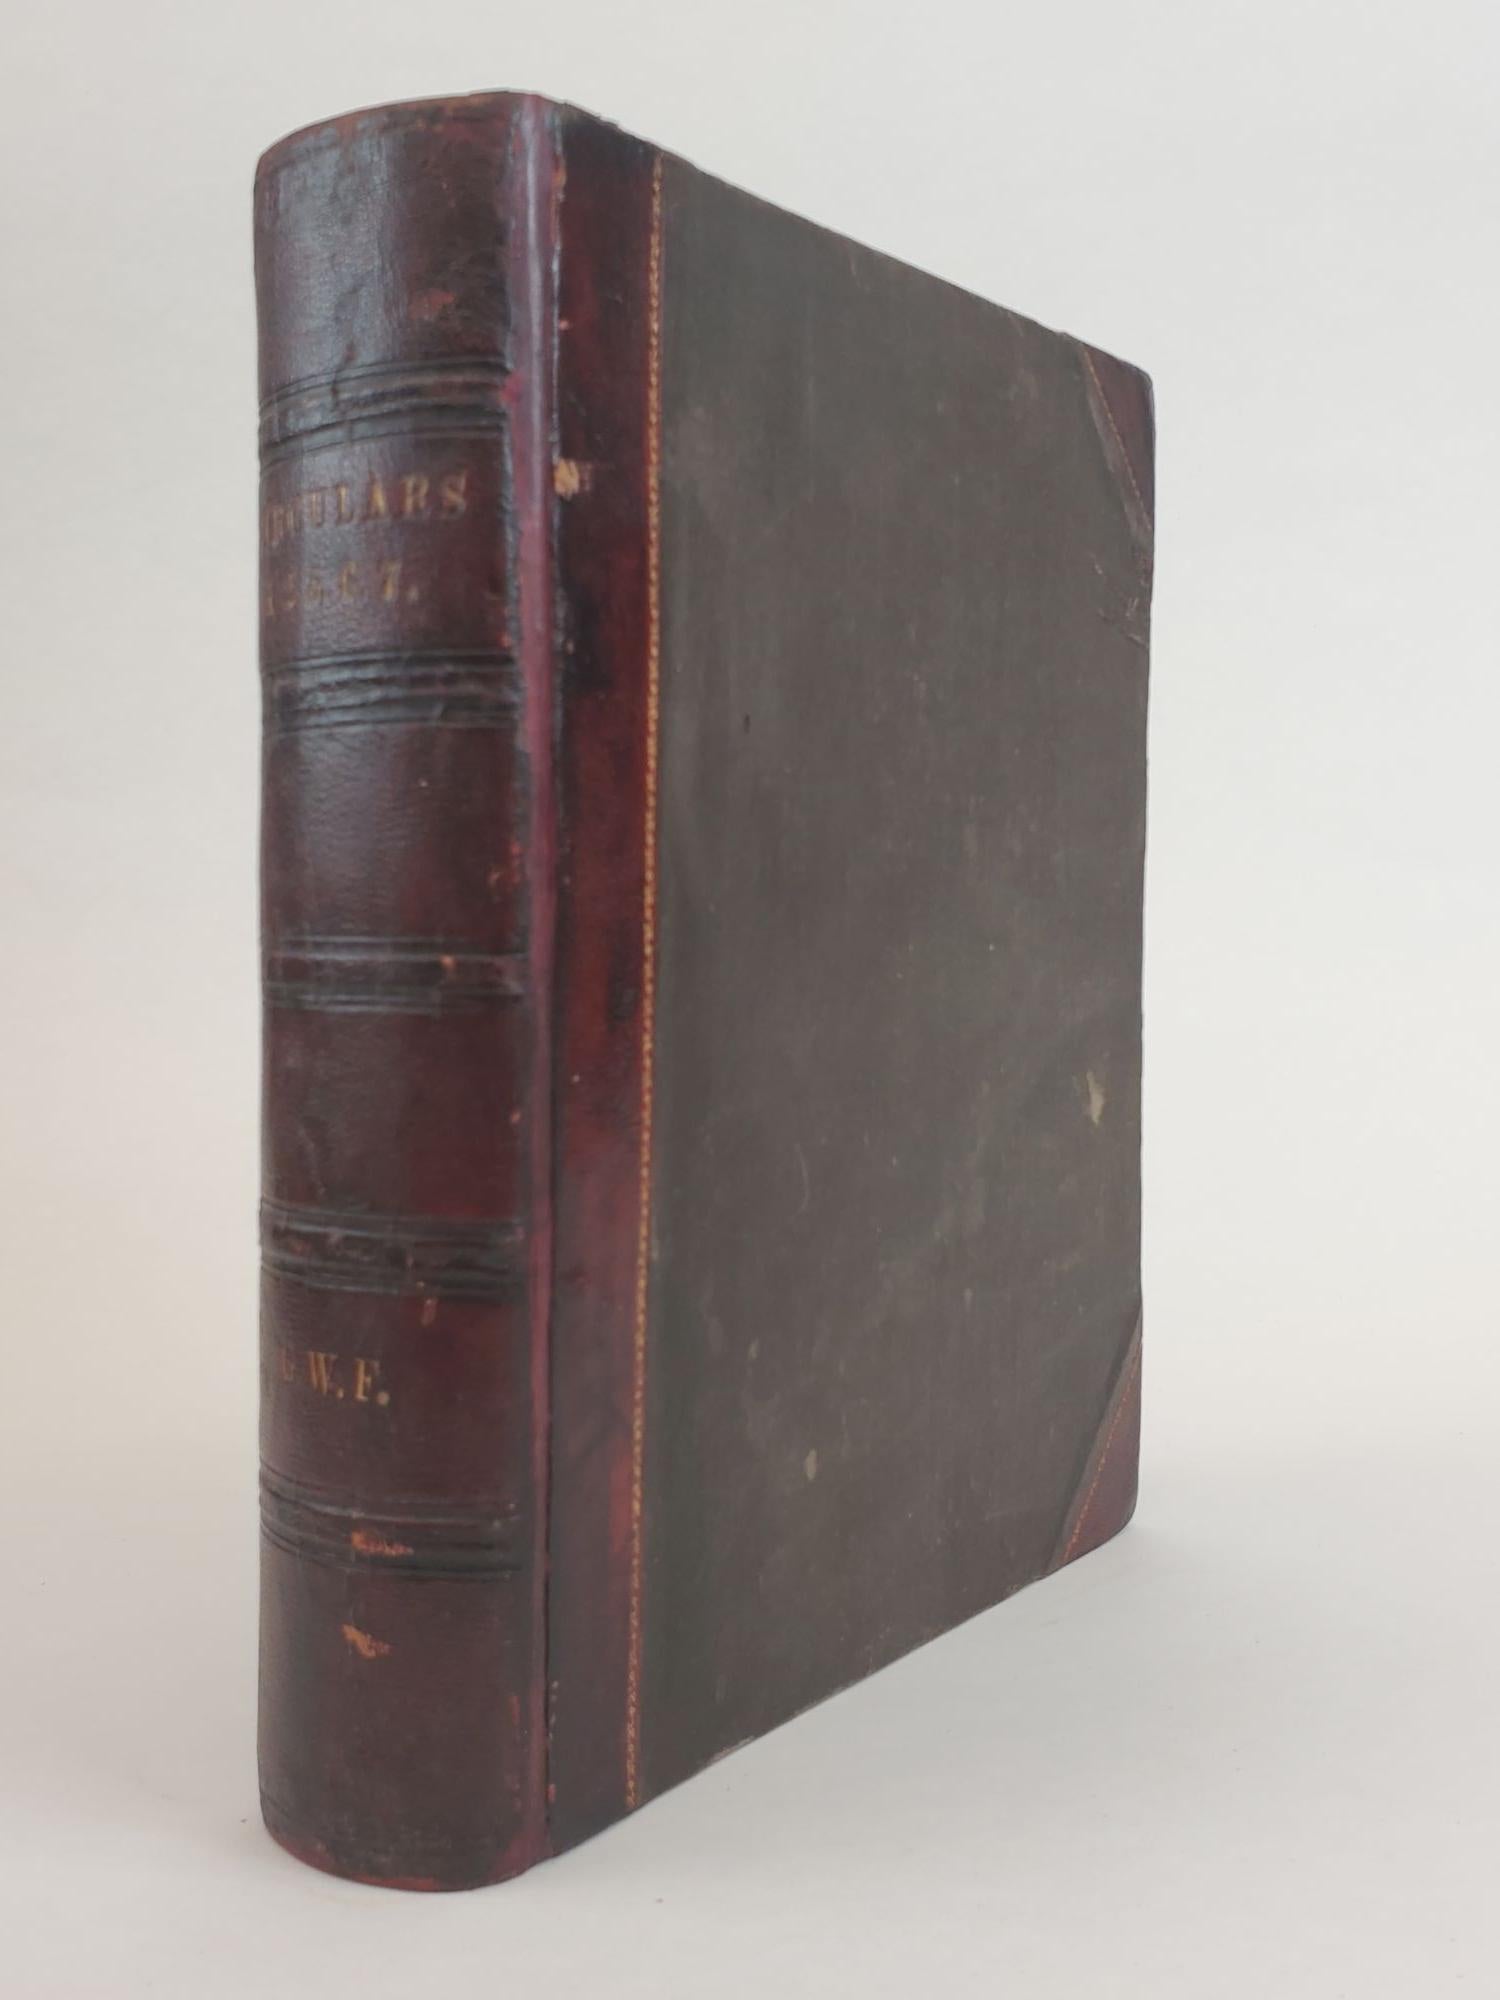 Product Image for REPORT ON EPIDEMIC CHOLERA AND YELLOW FEVER IN THE ARMY OF THE UNITED STATES DURING THE YEAR 1867; [Bound with] A REPORT ON EXCISIONS OF THE HEAD OF THE FEMUR FOR GUNSHOT INJURY; [Bound with] REPORT ON EPIDEMIC CHOLERA IN THE ARMY OF THE UNITED STATES, DU